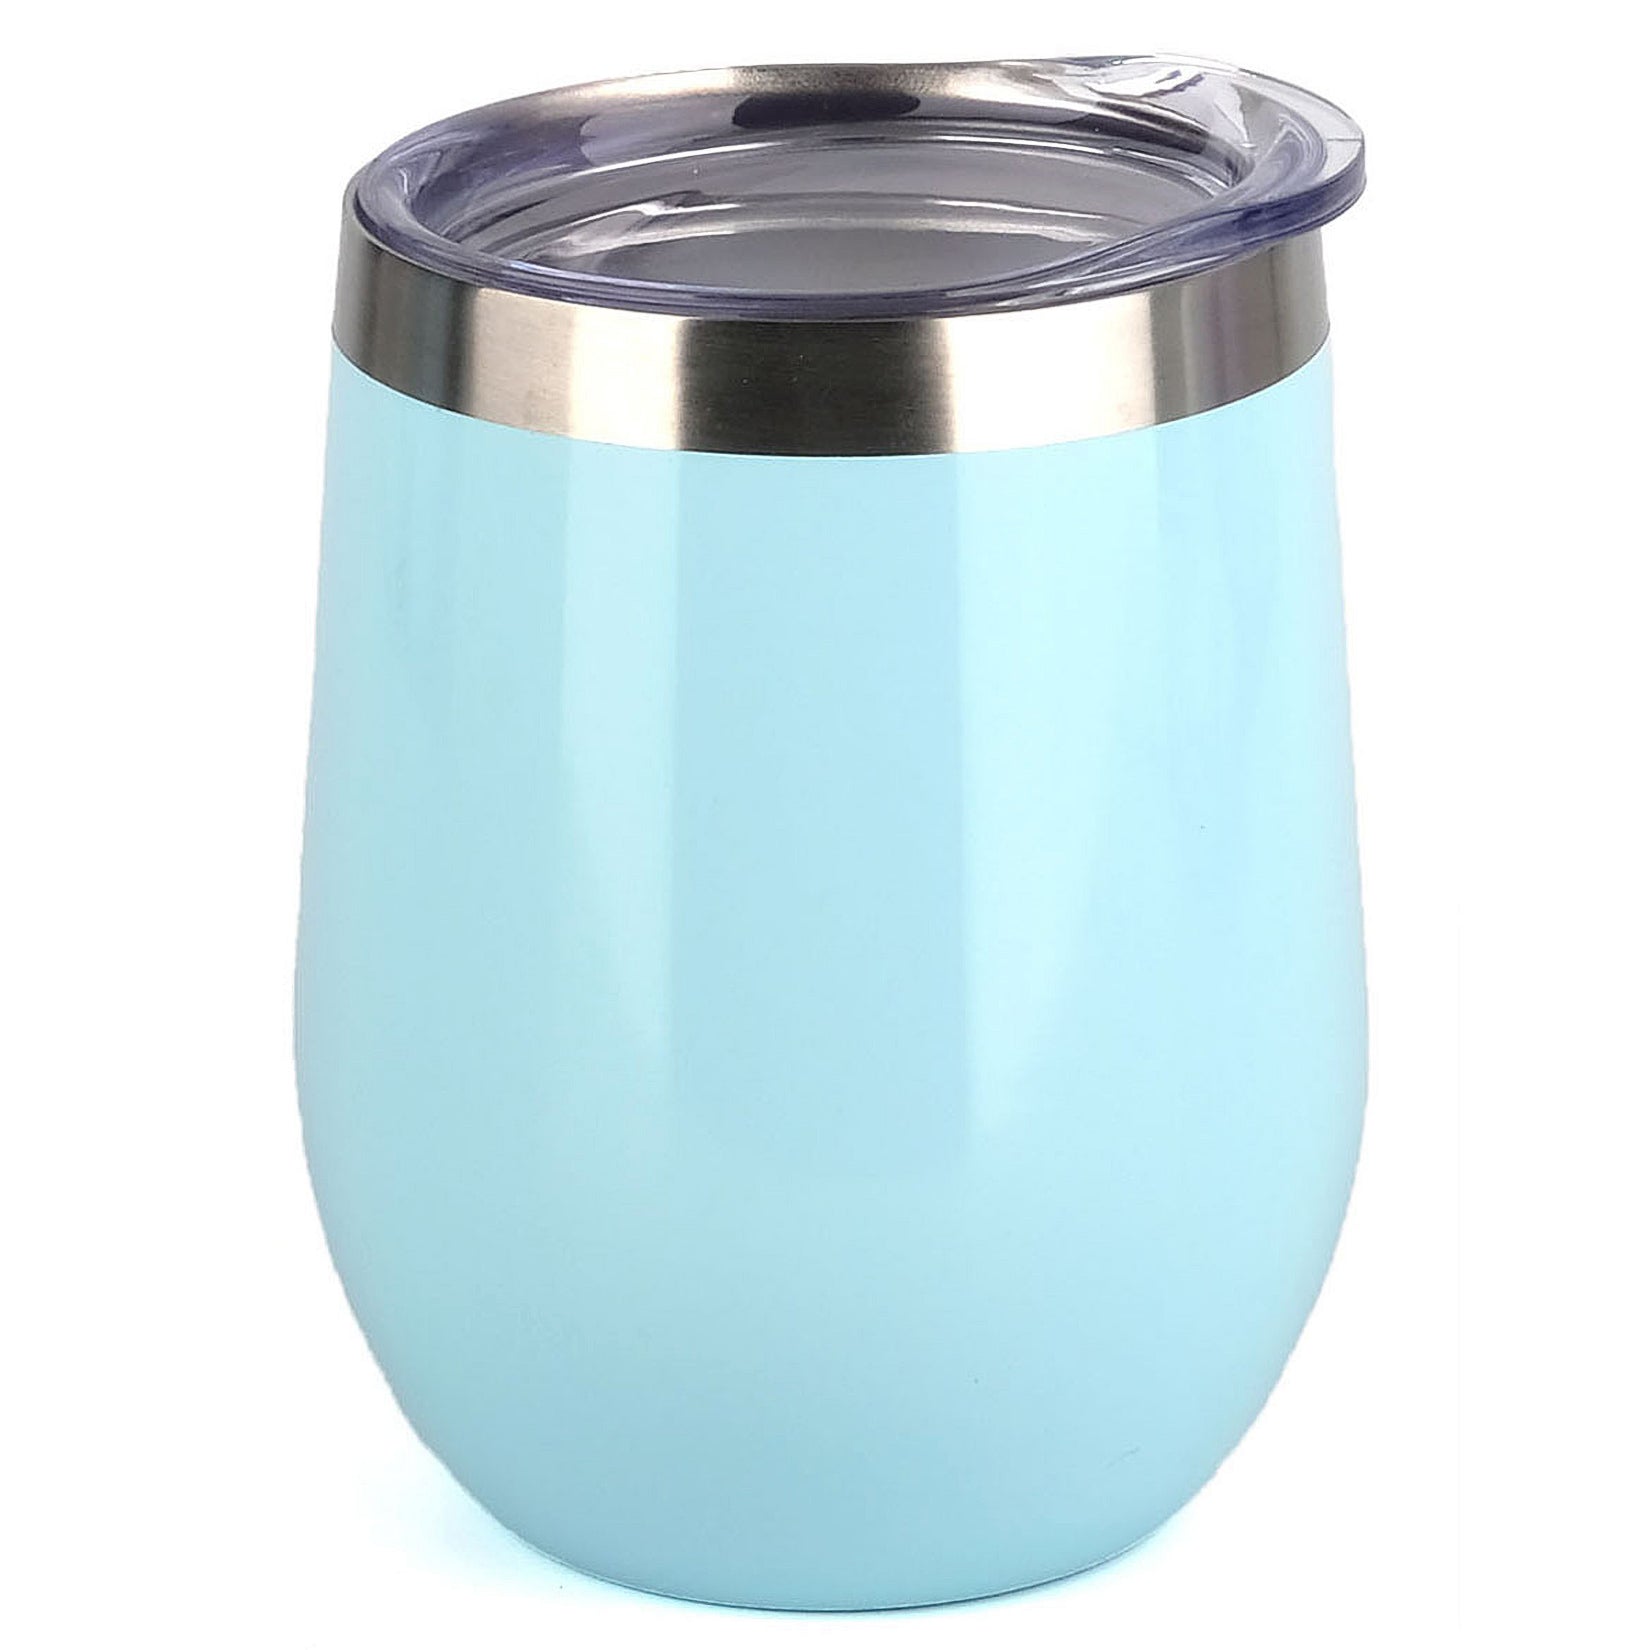 Double Wall Vacuum Insulated Stainless Steel Wine Tumbler 14 fl oz